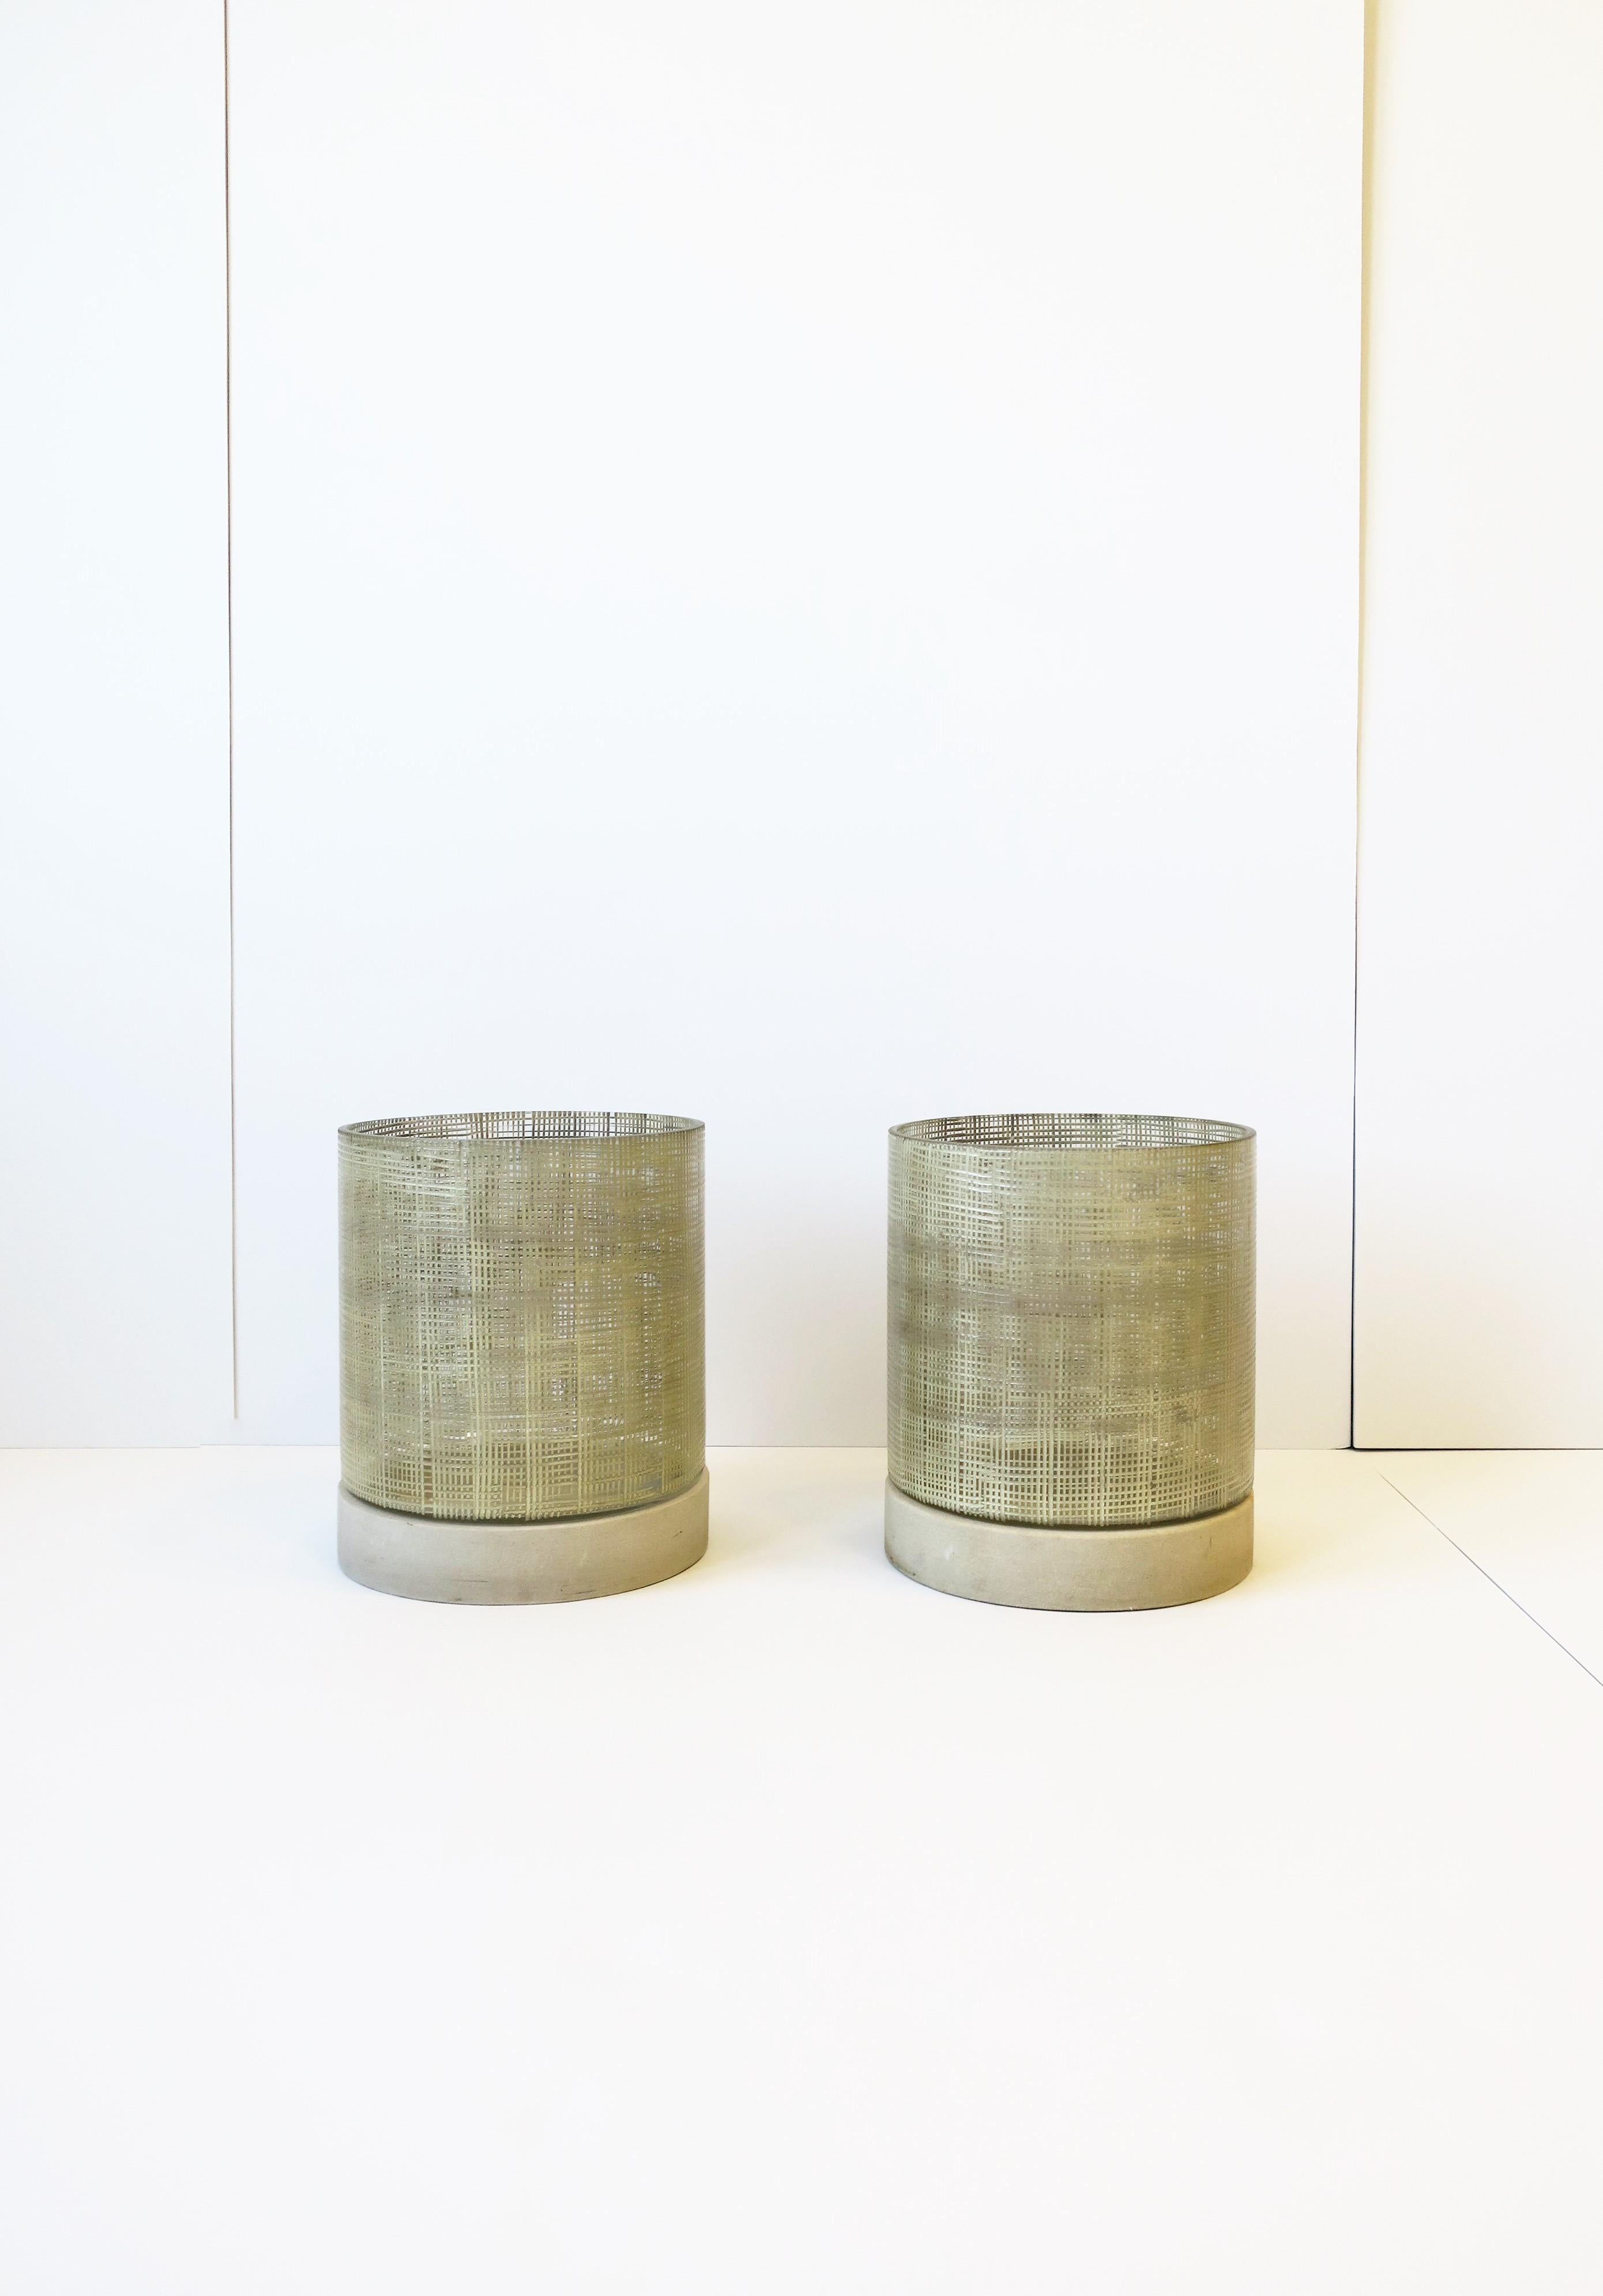 A beautiful pair of Minimalist style glass and stone hurricane candle lamps, circa late-20th century to early 21st century. The design and textured art glass give this set a bit of Midcentury Modern look and feel, and the stone bases add a bit of a